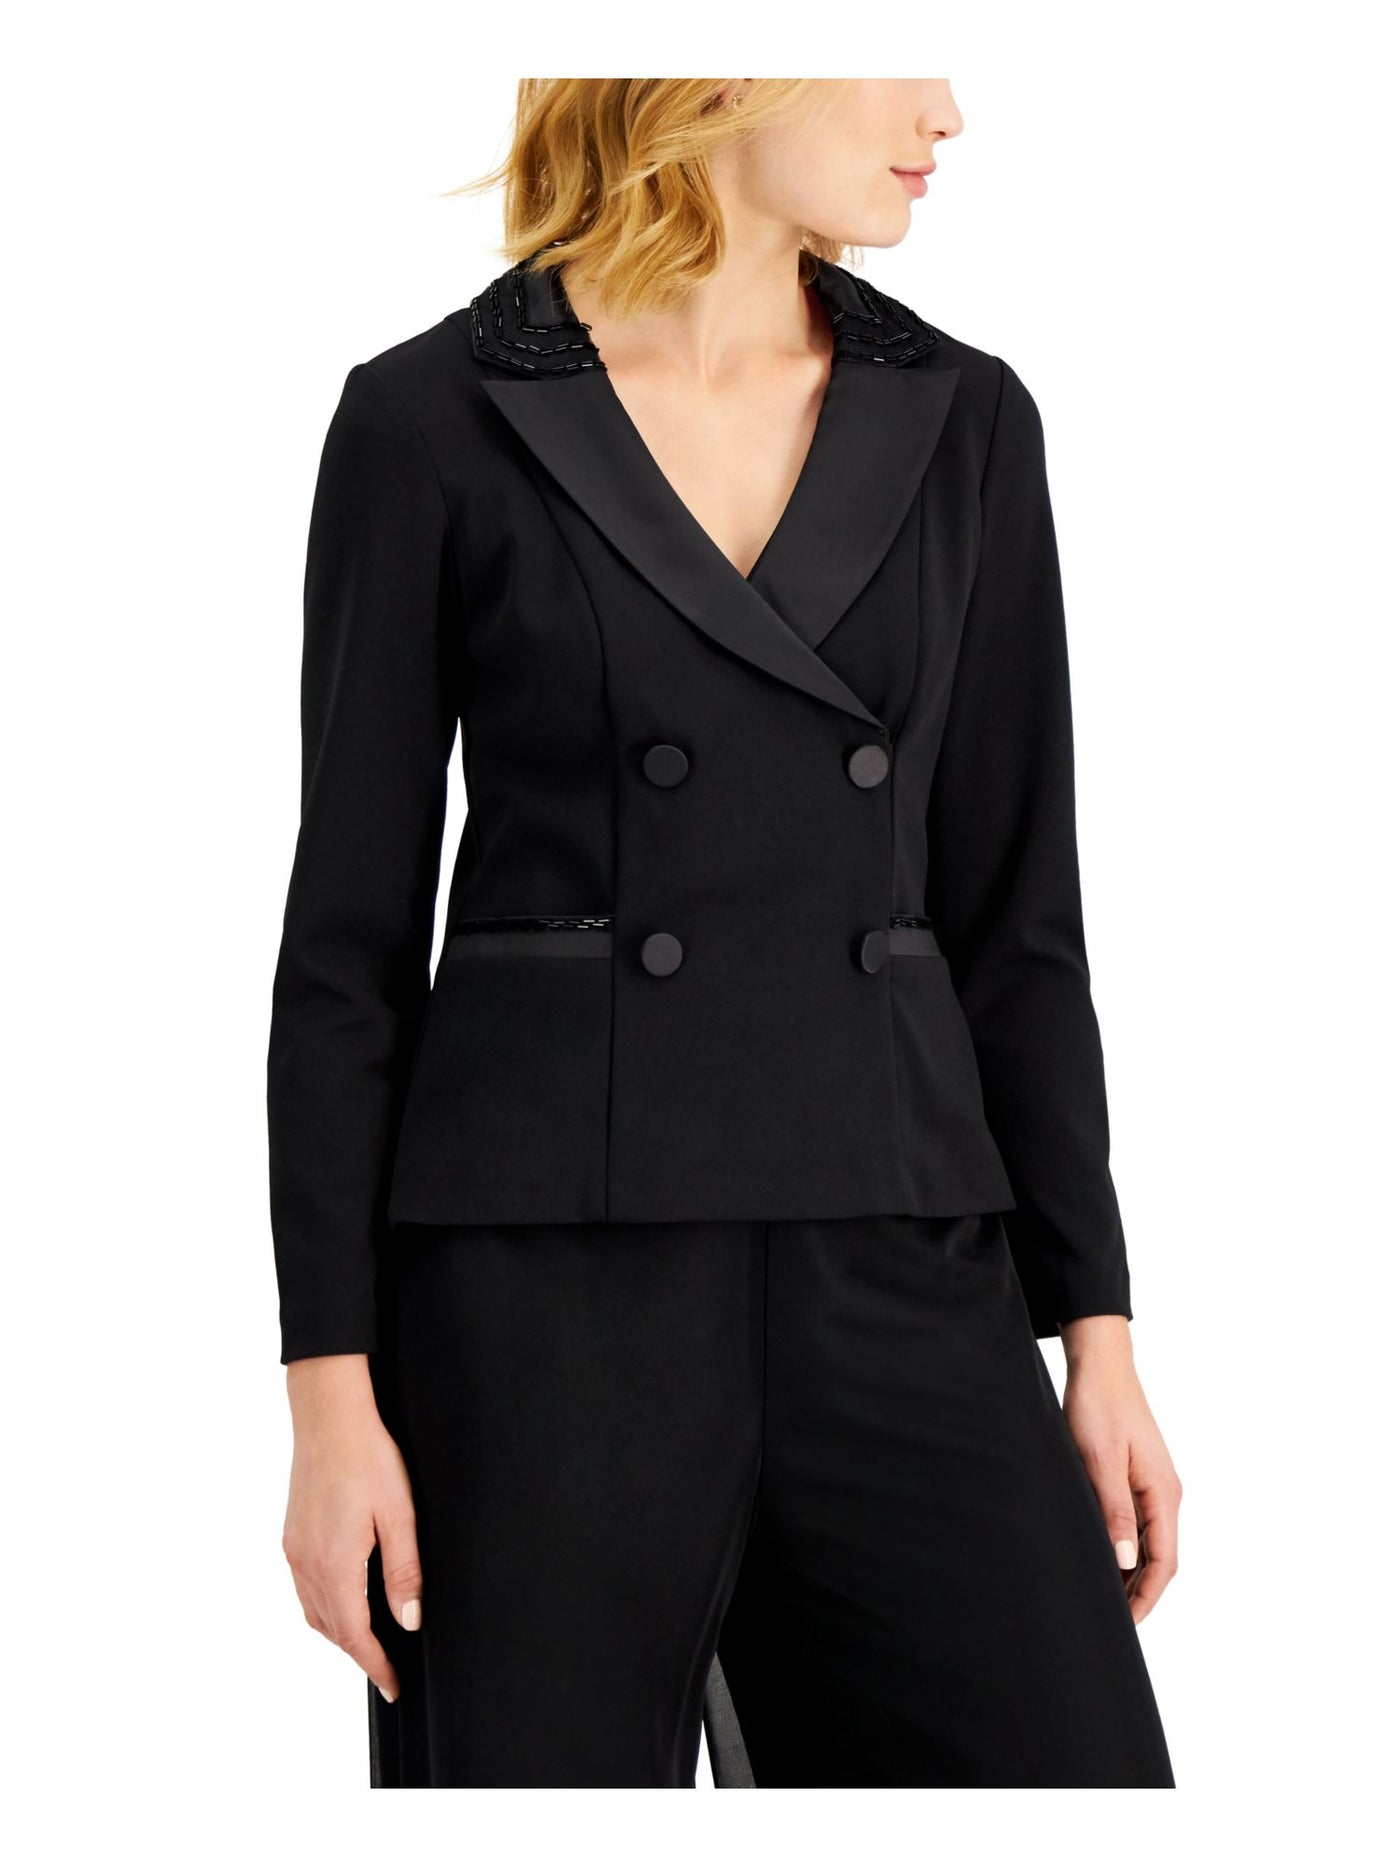 ADRIANNA PAPELL Womens Beaded Lined Double Breasted Tuxedo Wear To Work Jacket